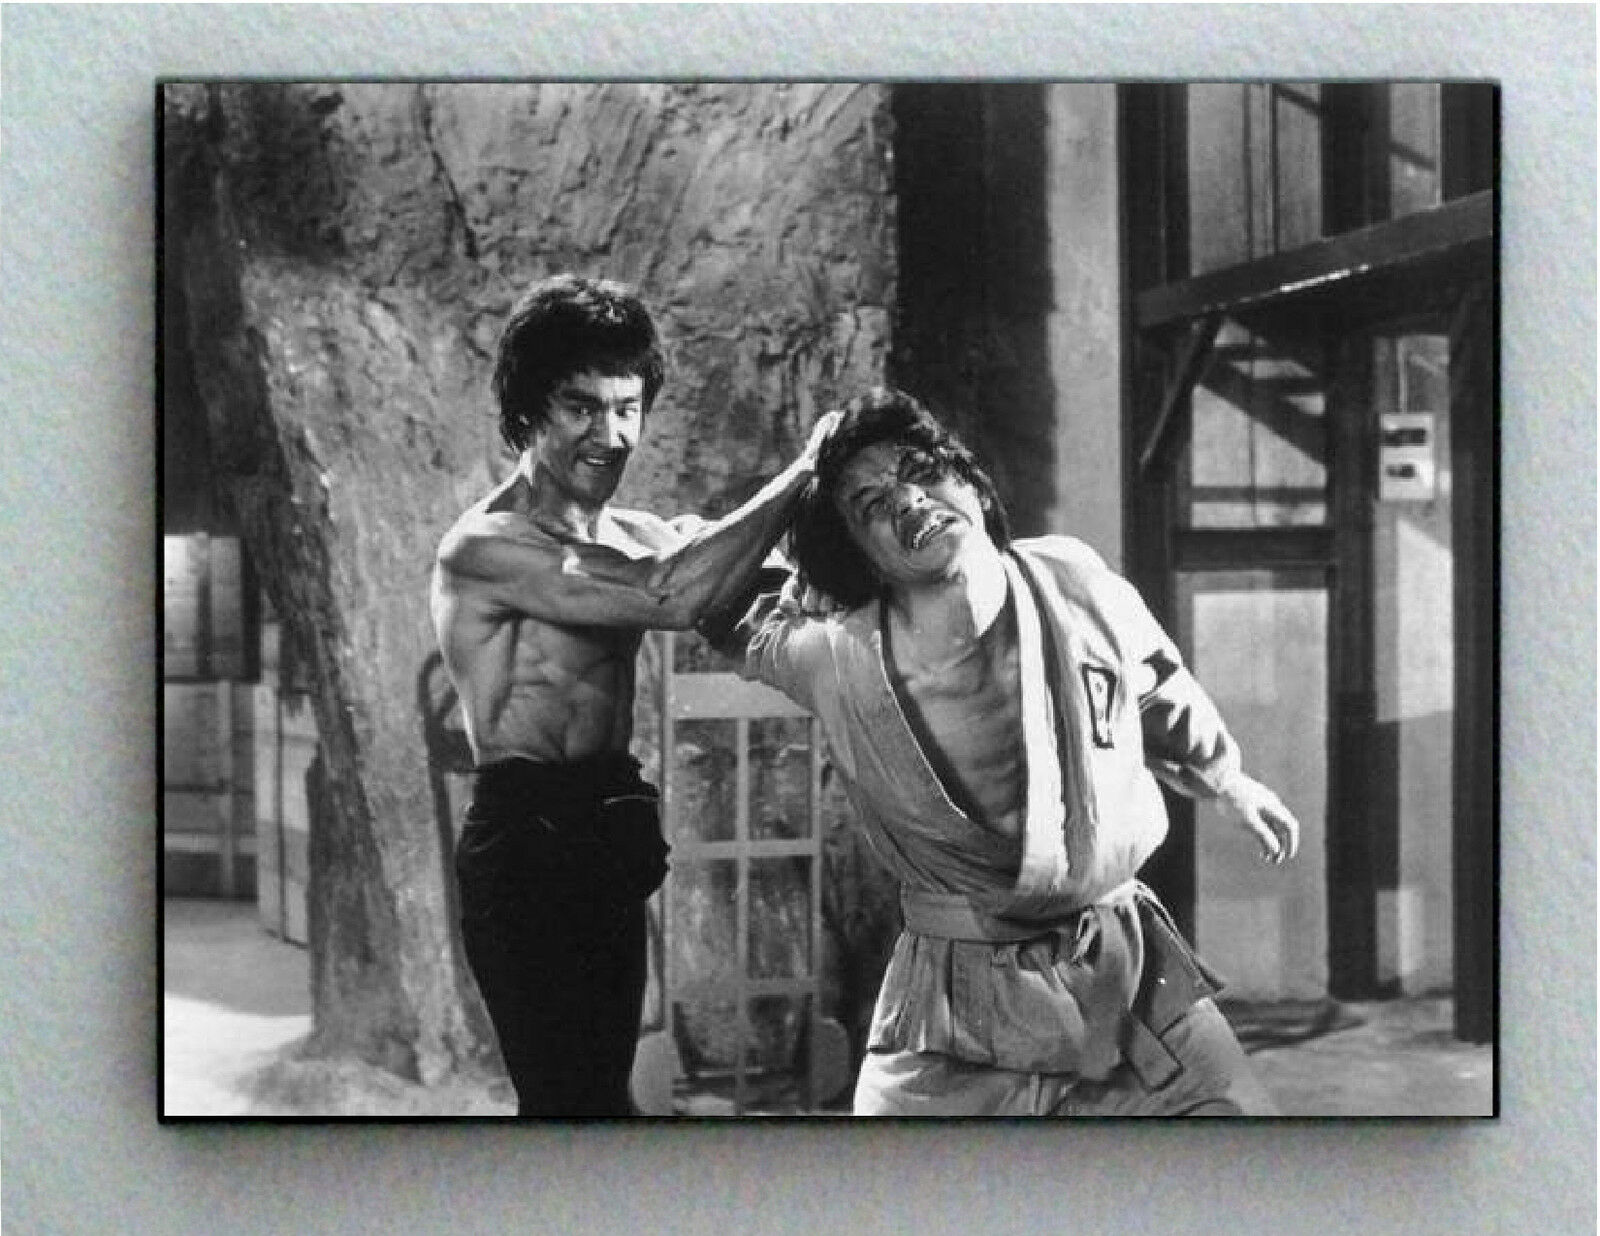 What a Moment in Cinema History!”: Resurfaced Image of Bruce Lee and Jackie  Chan in Action Leaves Fans Nostalgic - EssentiallySports